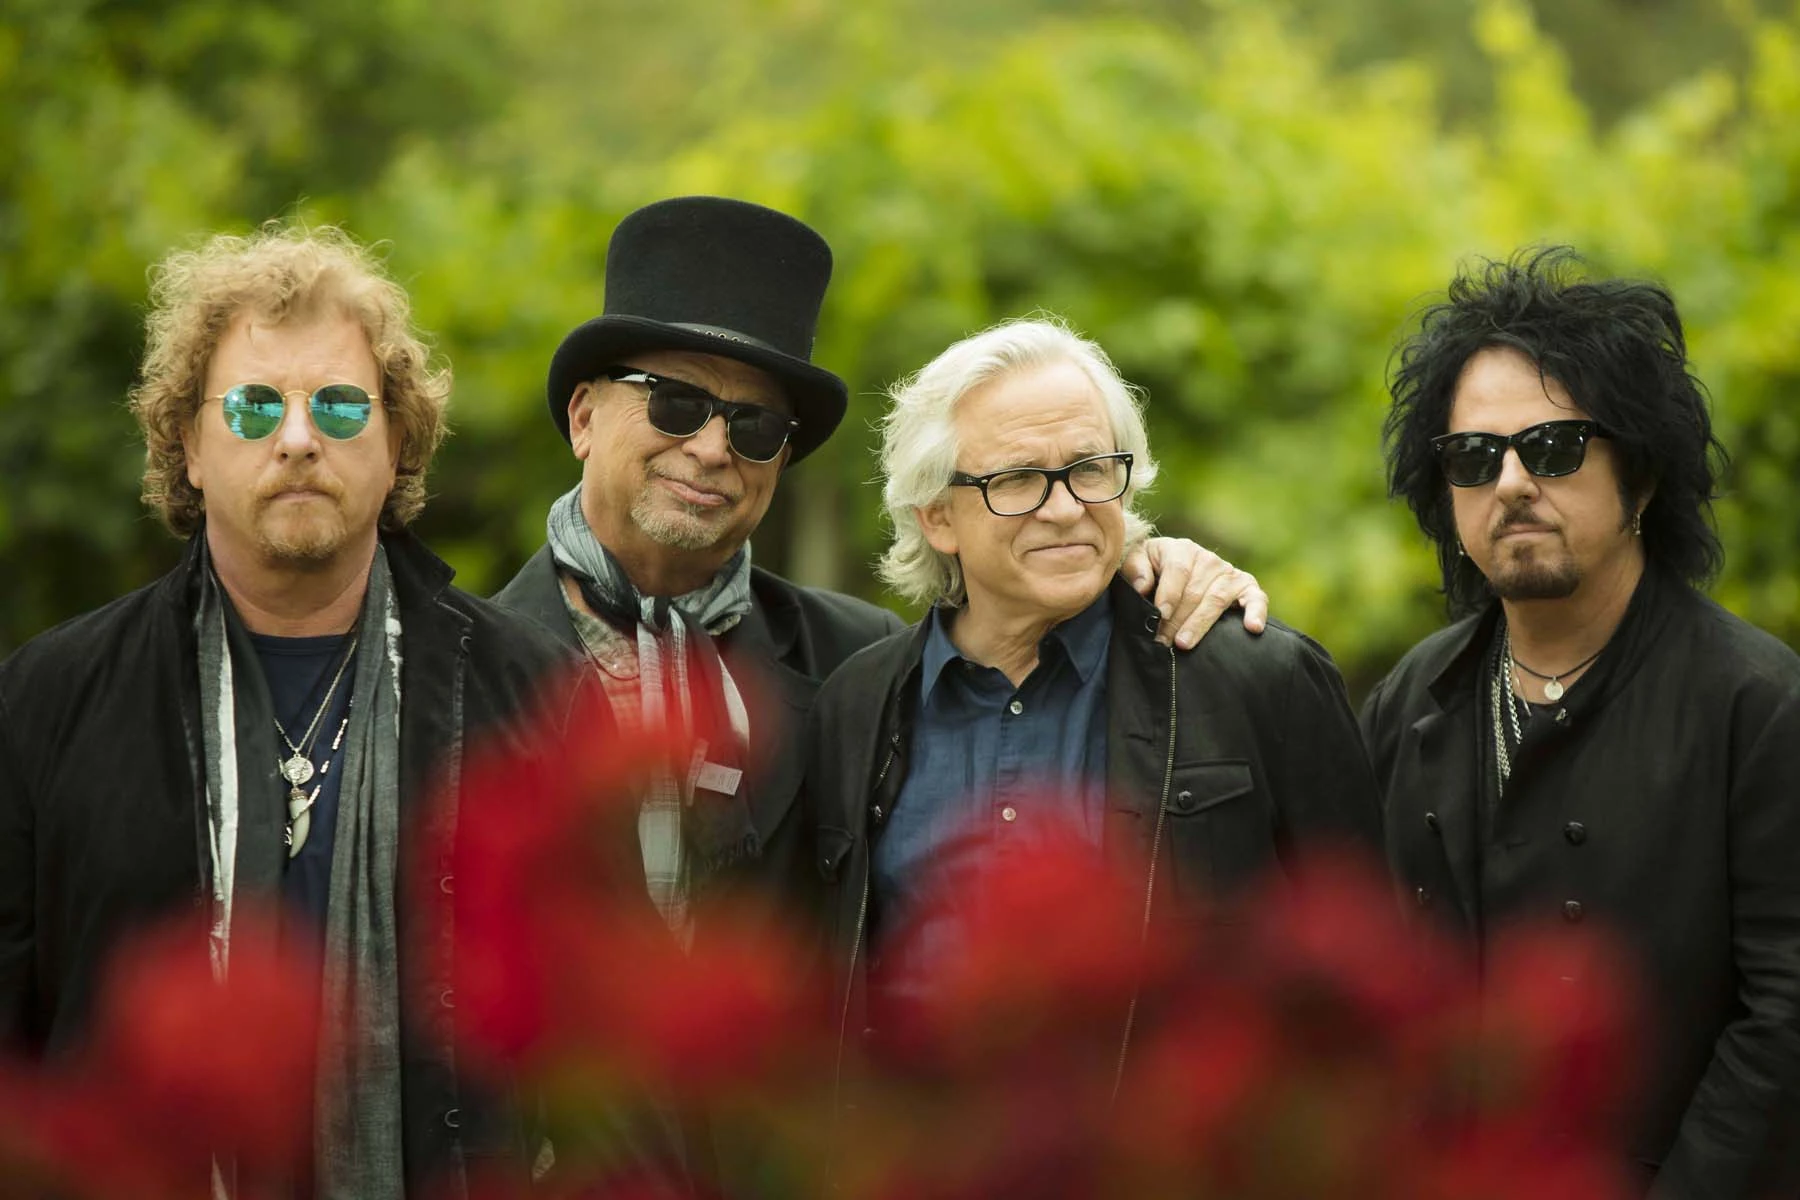 5 Things You Didn't Know About the Band Toto